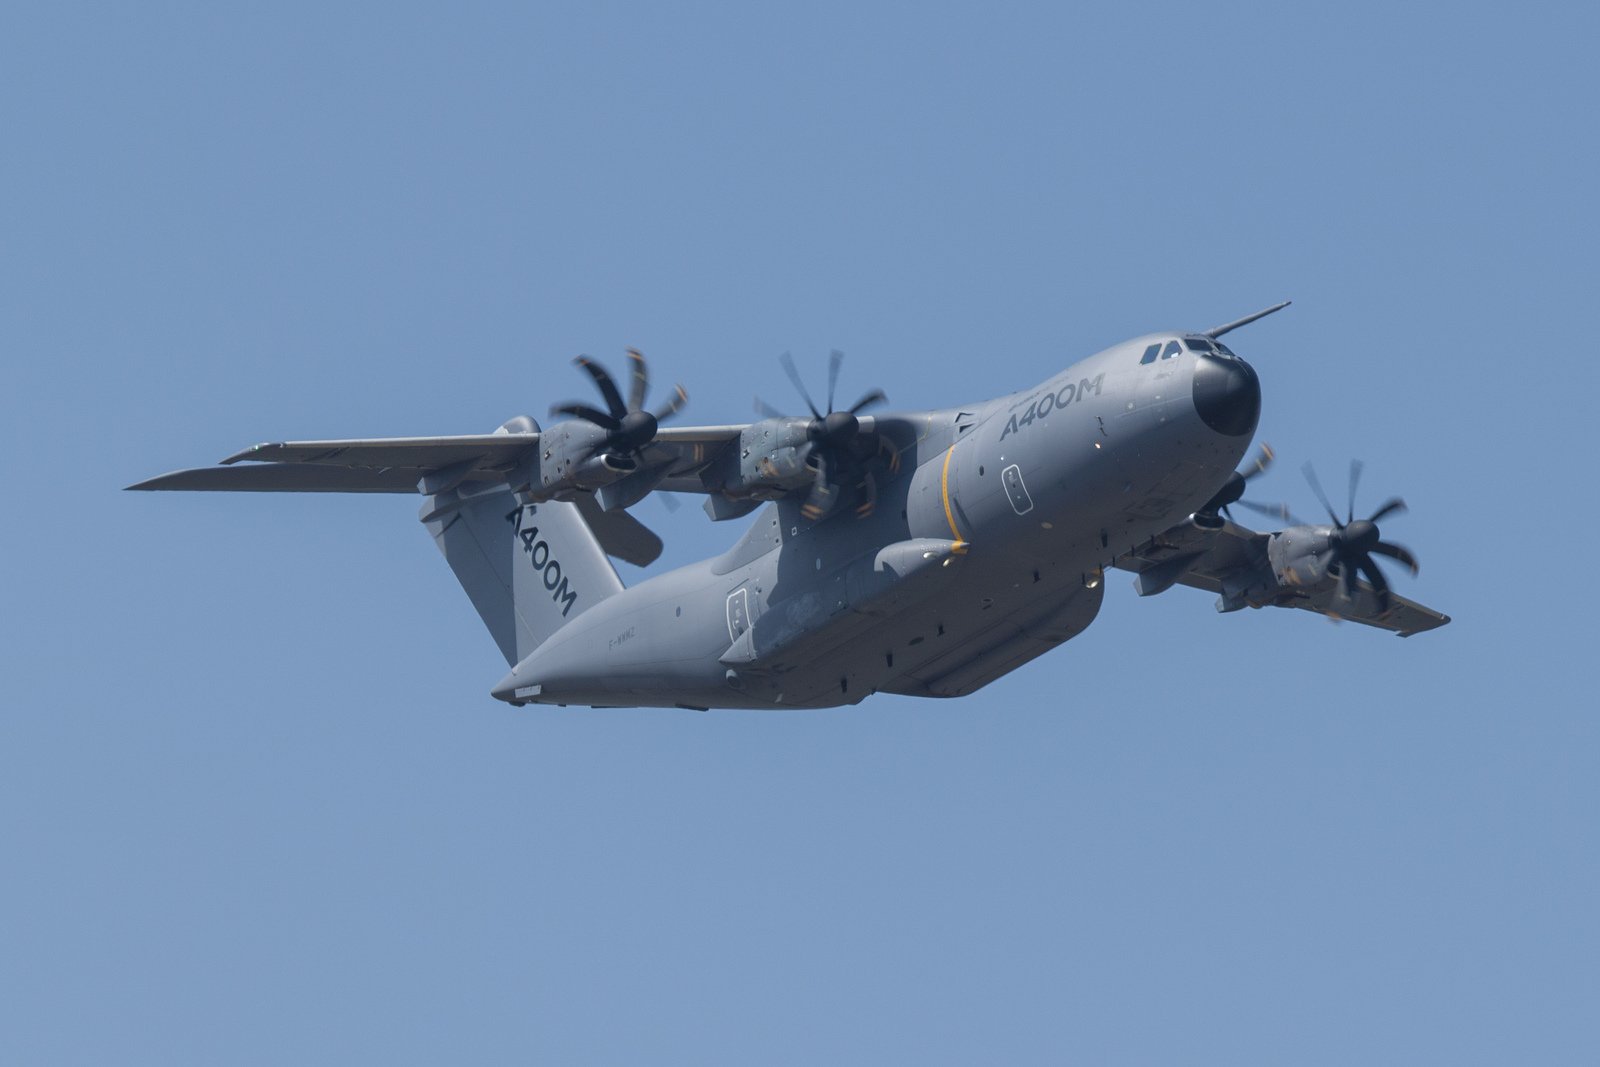 airbus, A400m, Atlas, 2013, Aircrafts, Transport, Military, Troups, Allemagne, France, Espagne, Royaume uni, Turquie, Belgique, Luxembourg, Malaisie, Europe Wallpaper